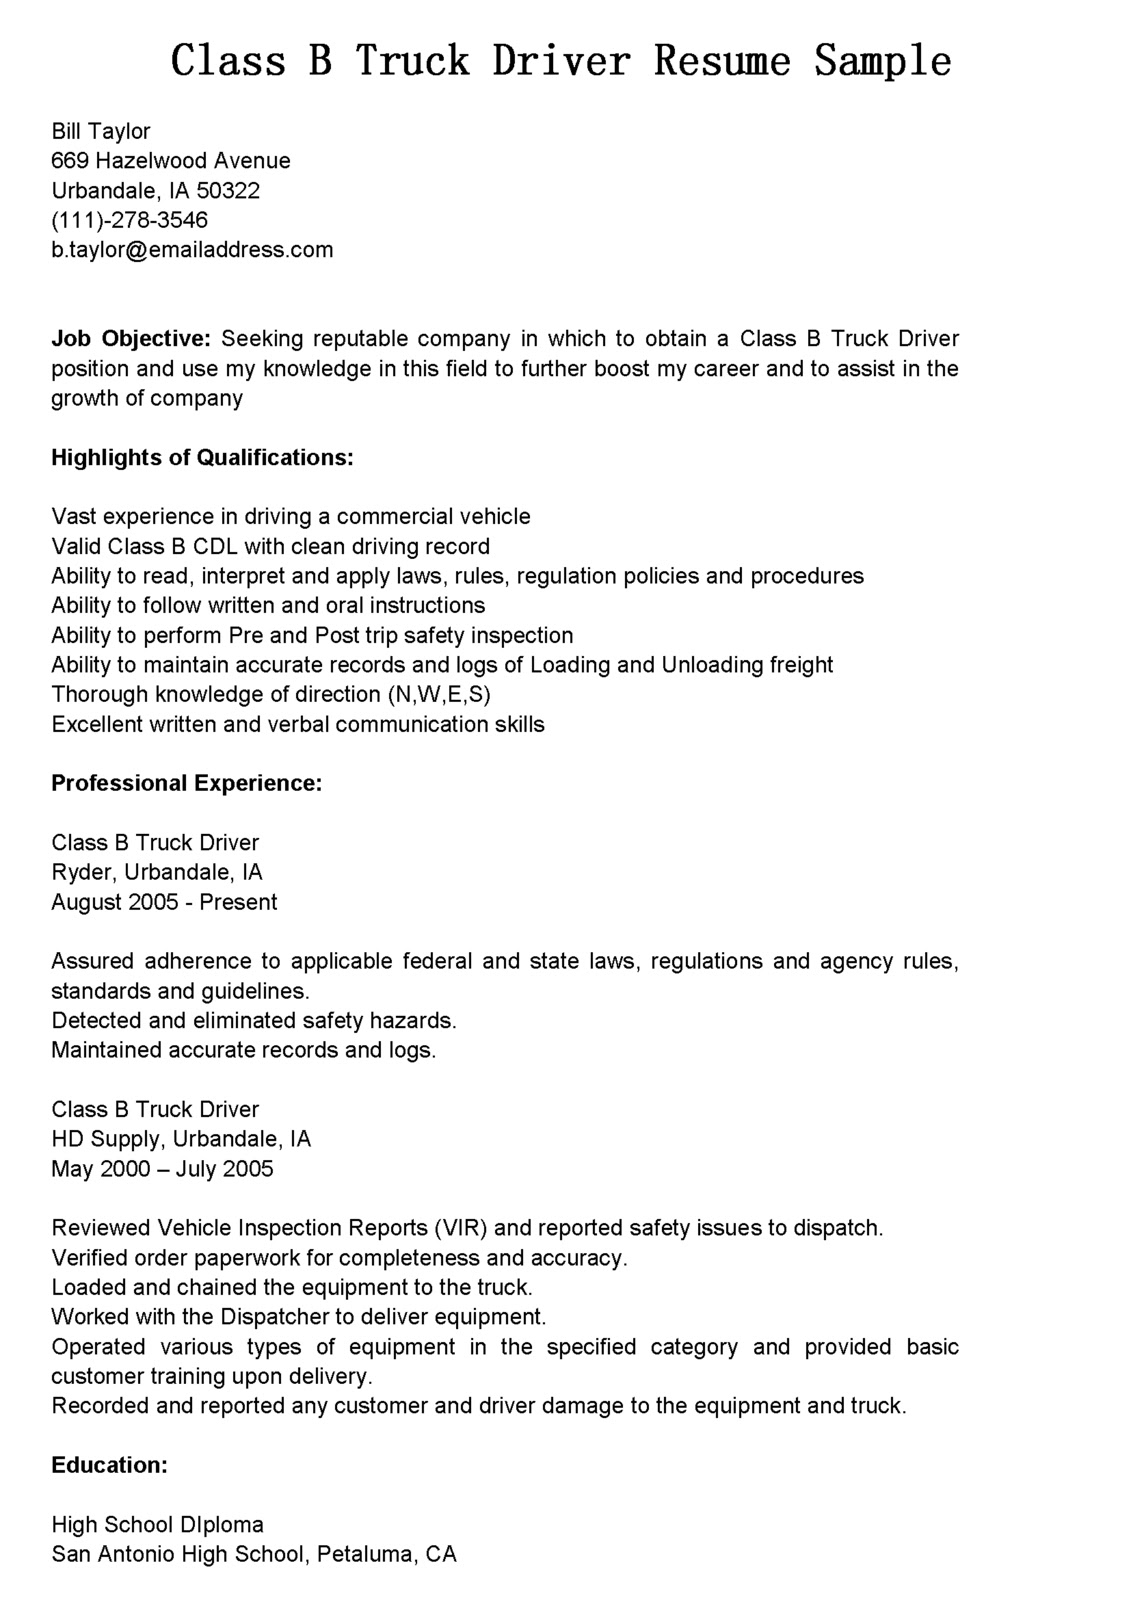 Resume templates for dispatchers